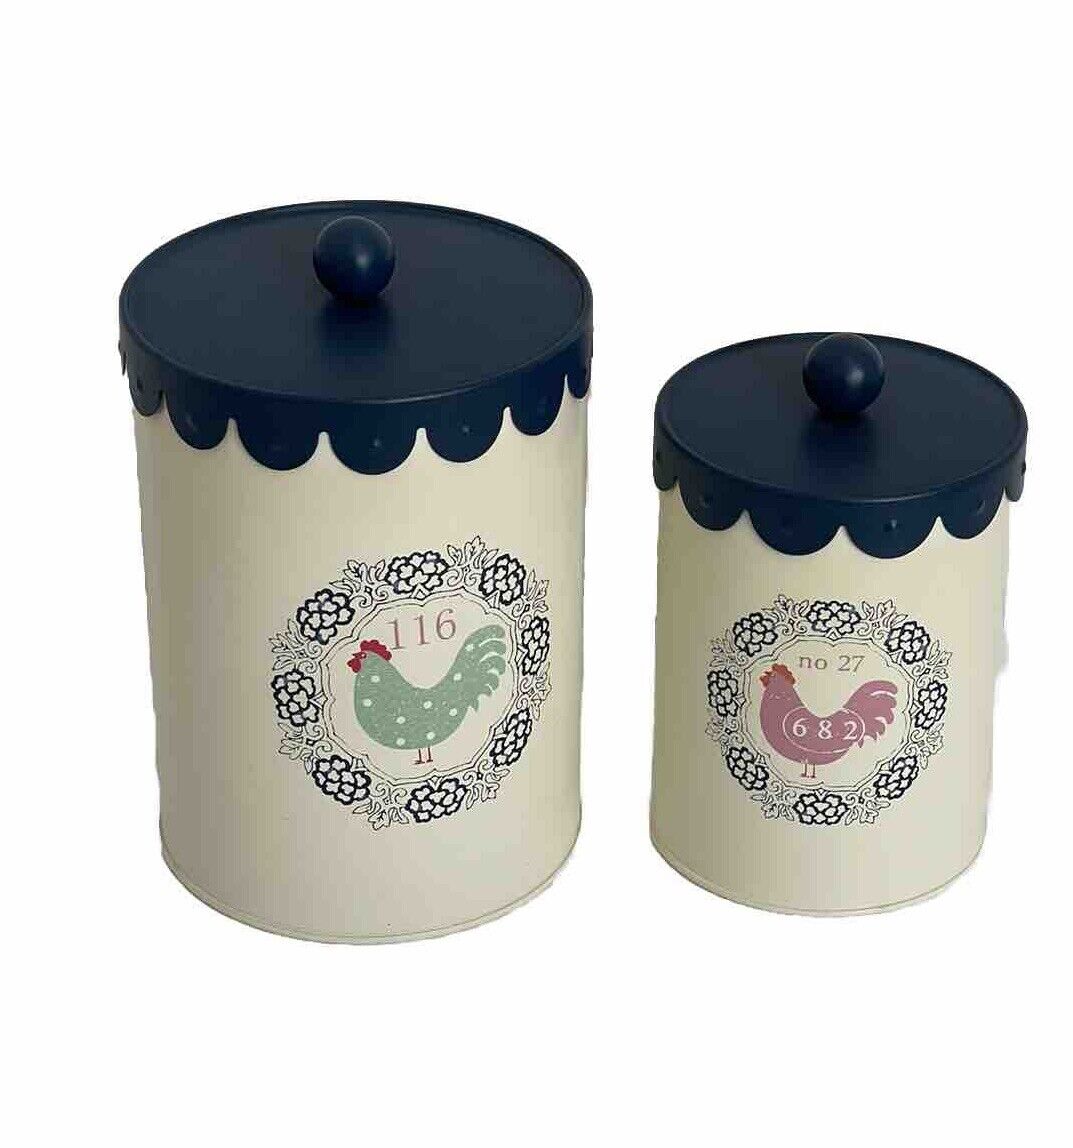 Vintage Matching Large & Small Tin Canisters Beige Navy Lid Chicken Farm Decor